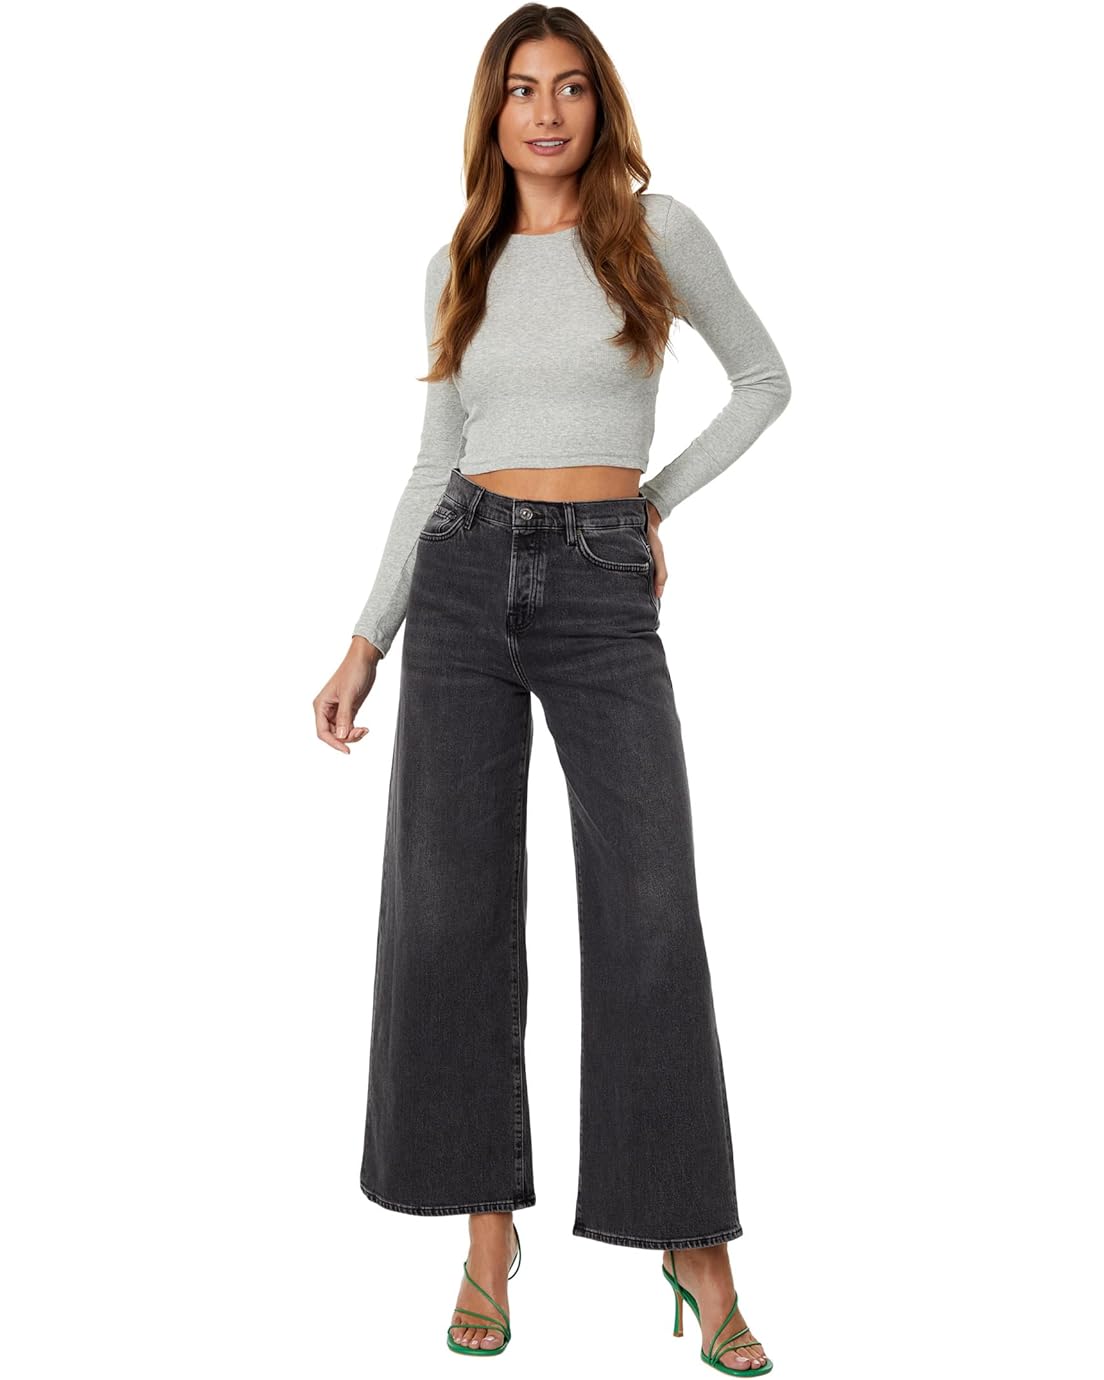  7 For All Mankind Zoey in Licorice